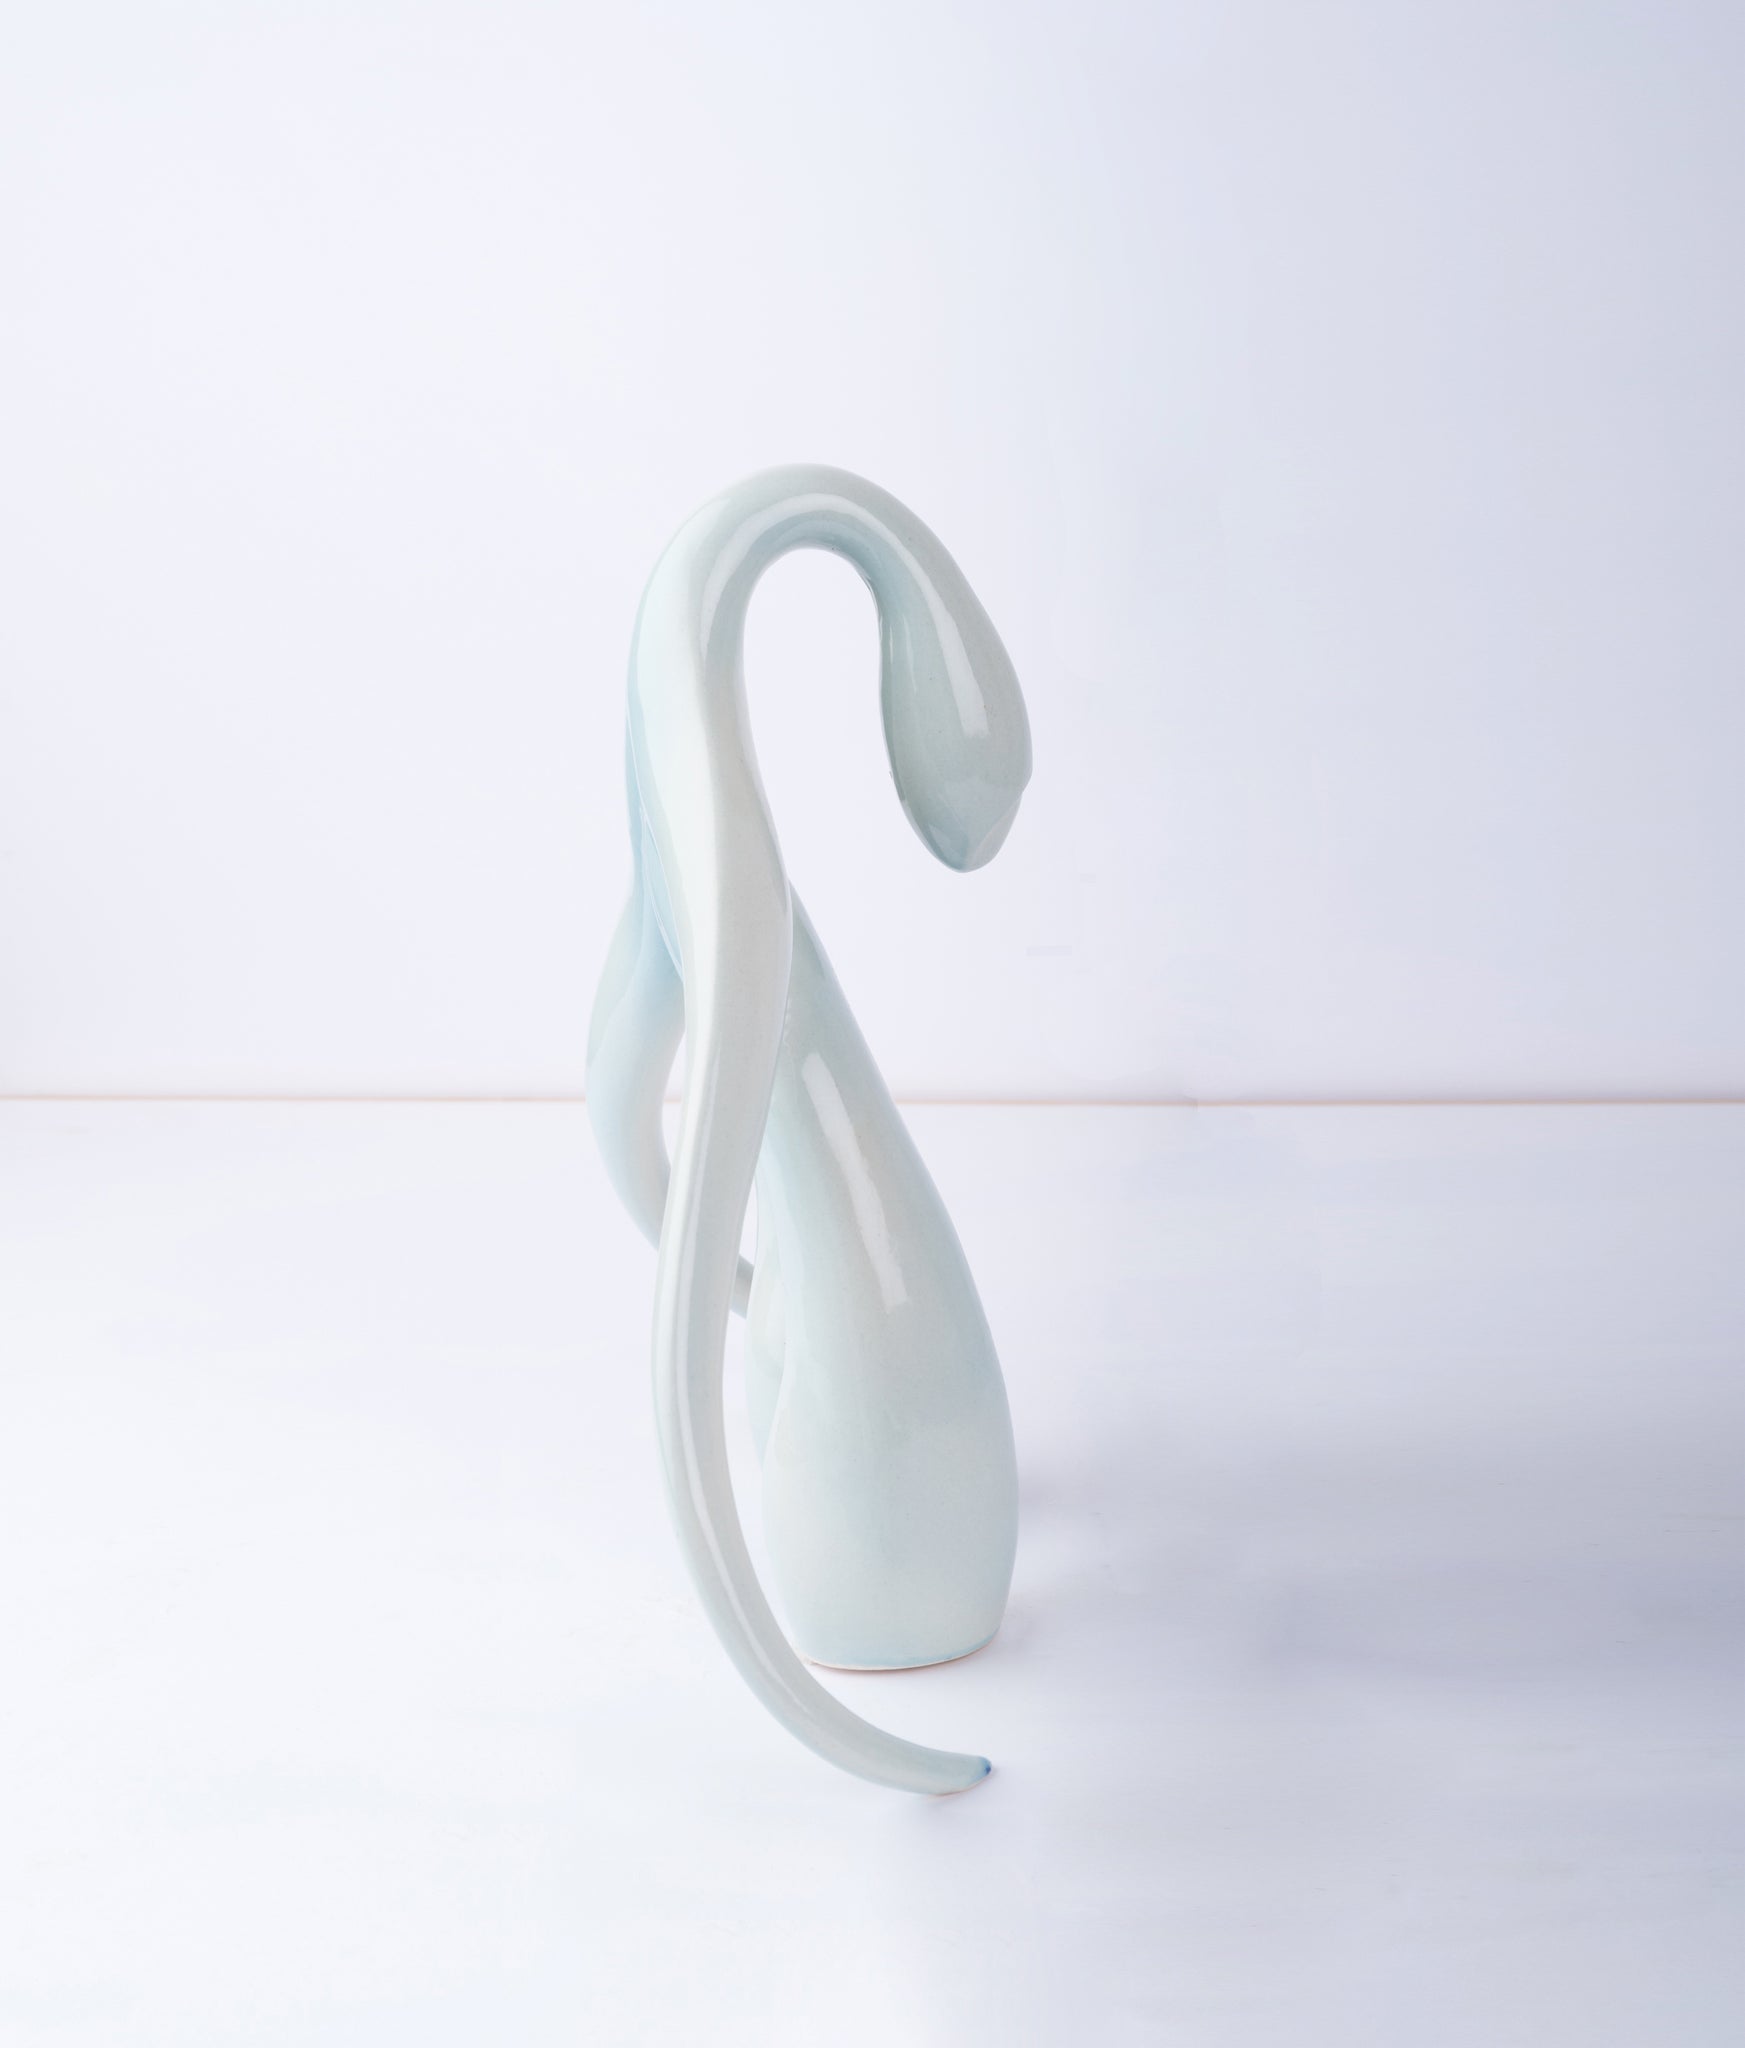 Side view of "Swan Series" ceramic sculpture in light aqua by Sophia Wallace, 2022.